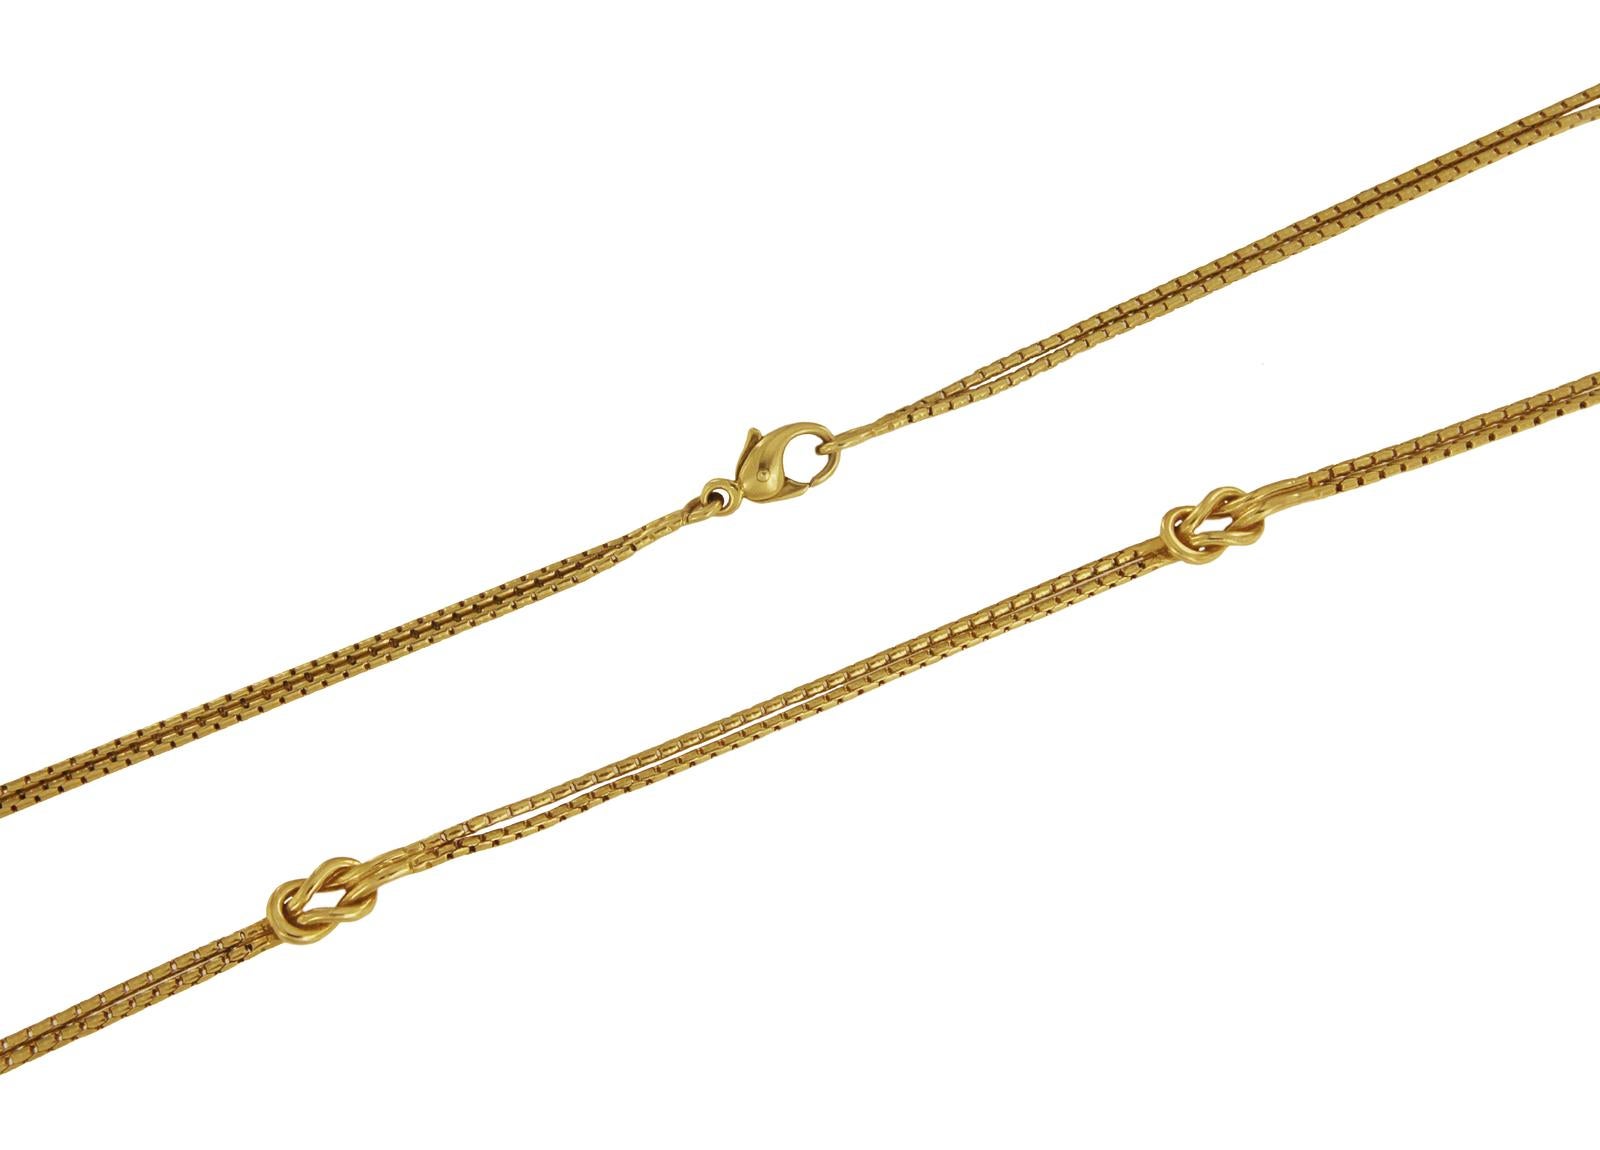 GUCCI 18K YELLOW GOLD KNOT DOUBLE CHAIN.

Mint condition
18k Yellow Gold
Chain length: 28”
Width: 2.7mm
Weight: 25gr